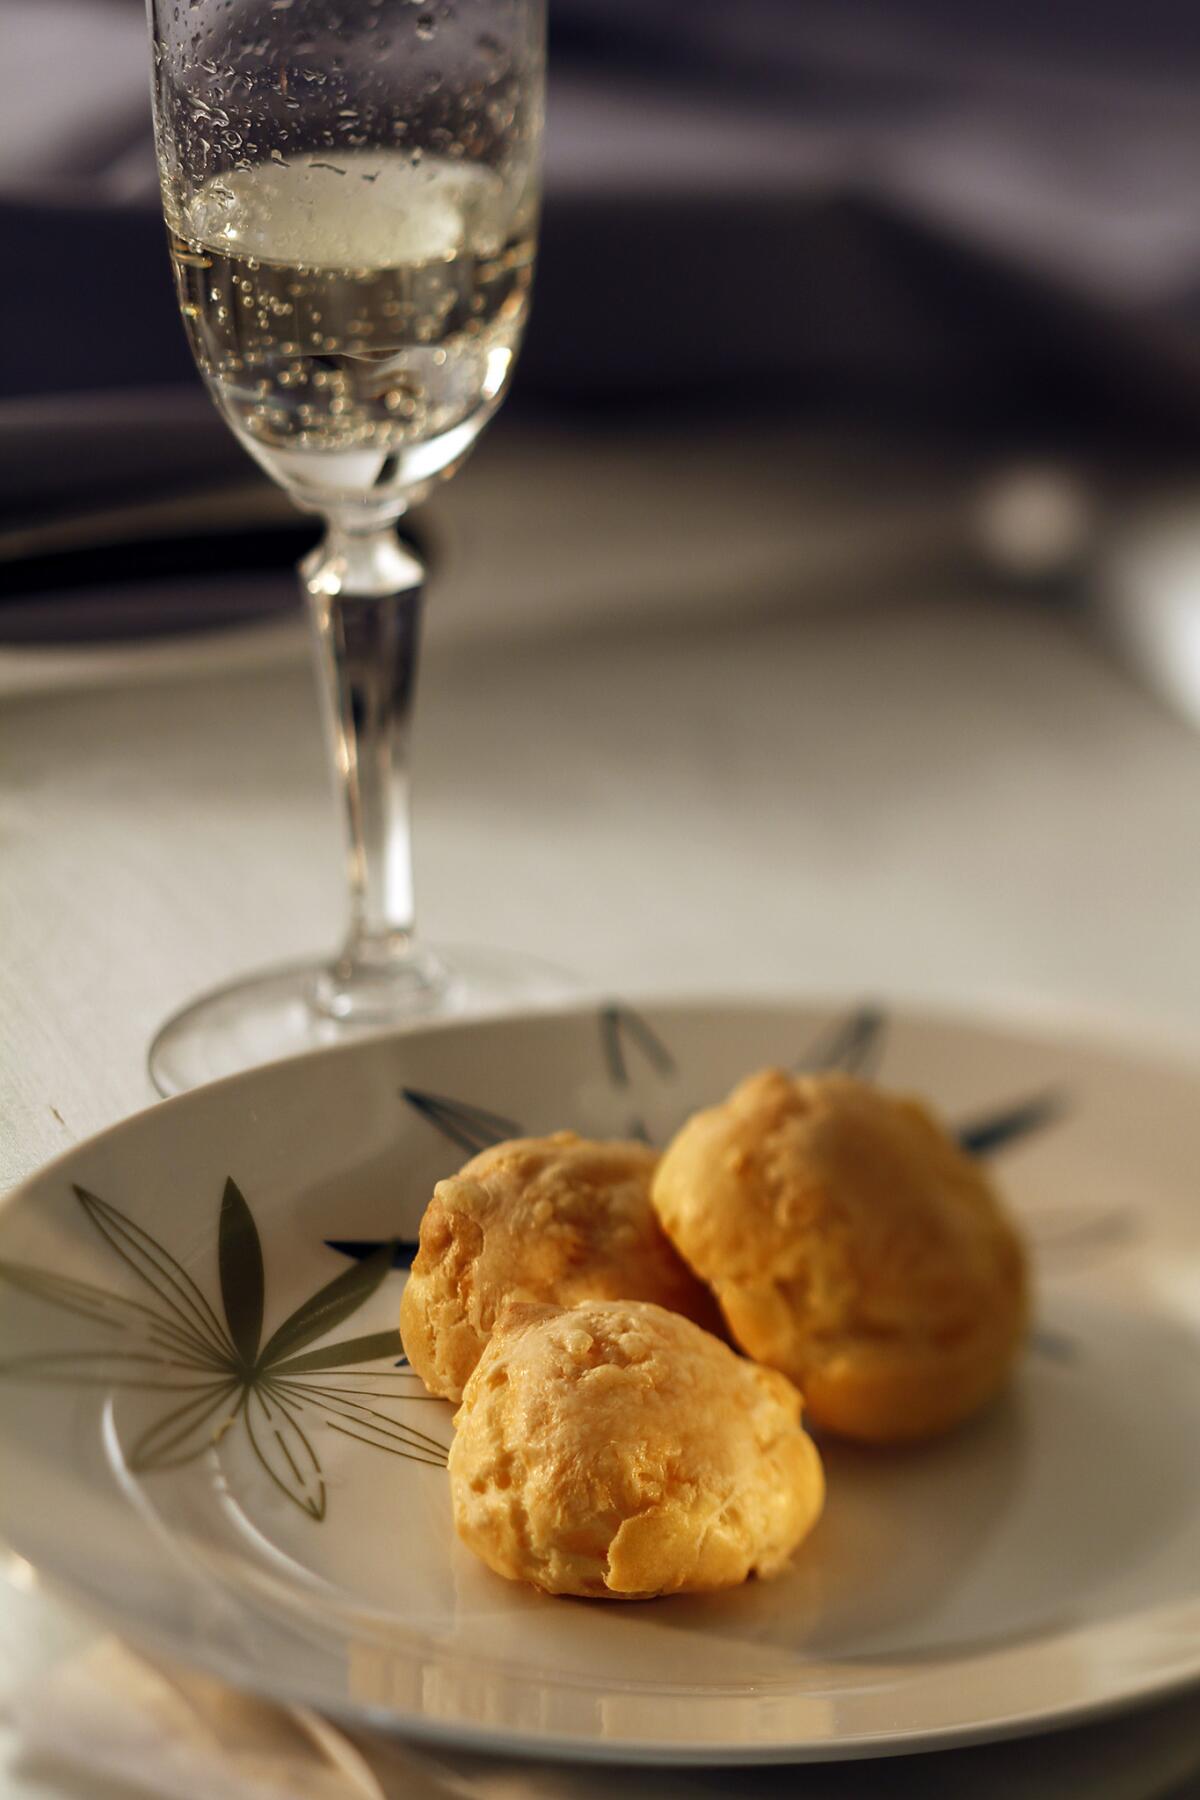 Searching for the perfect holiday finger food? Here are some canapes you can whip up for this year's party. First up: Gougères.